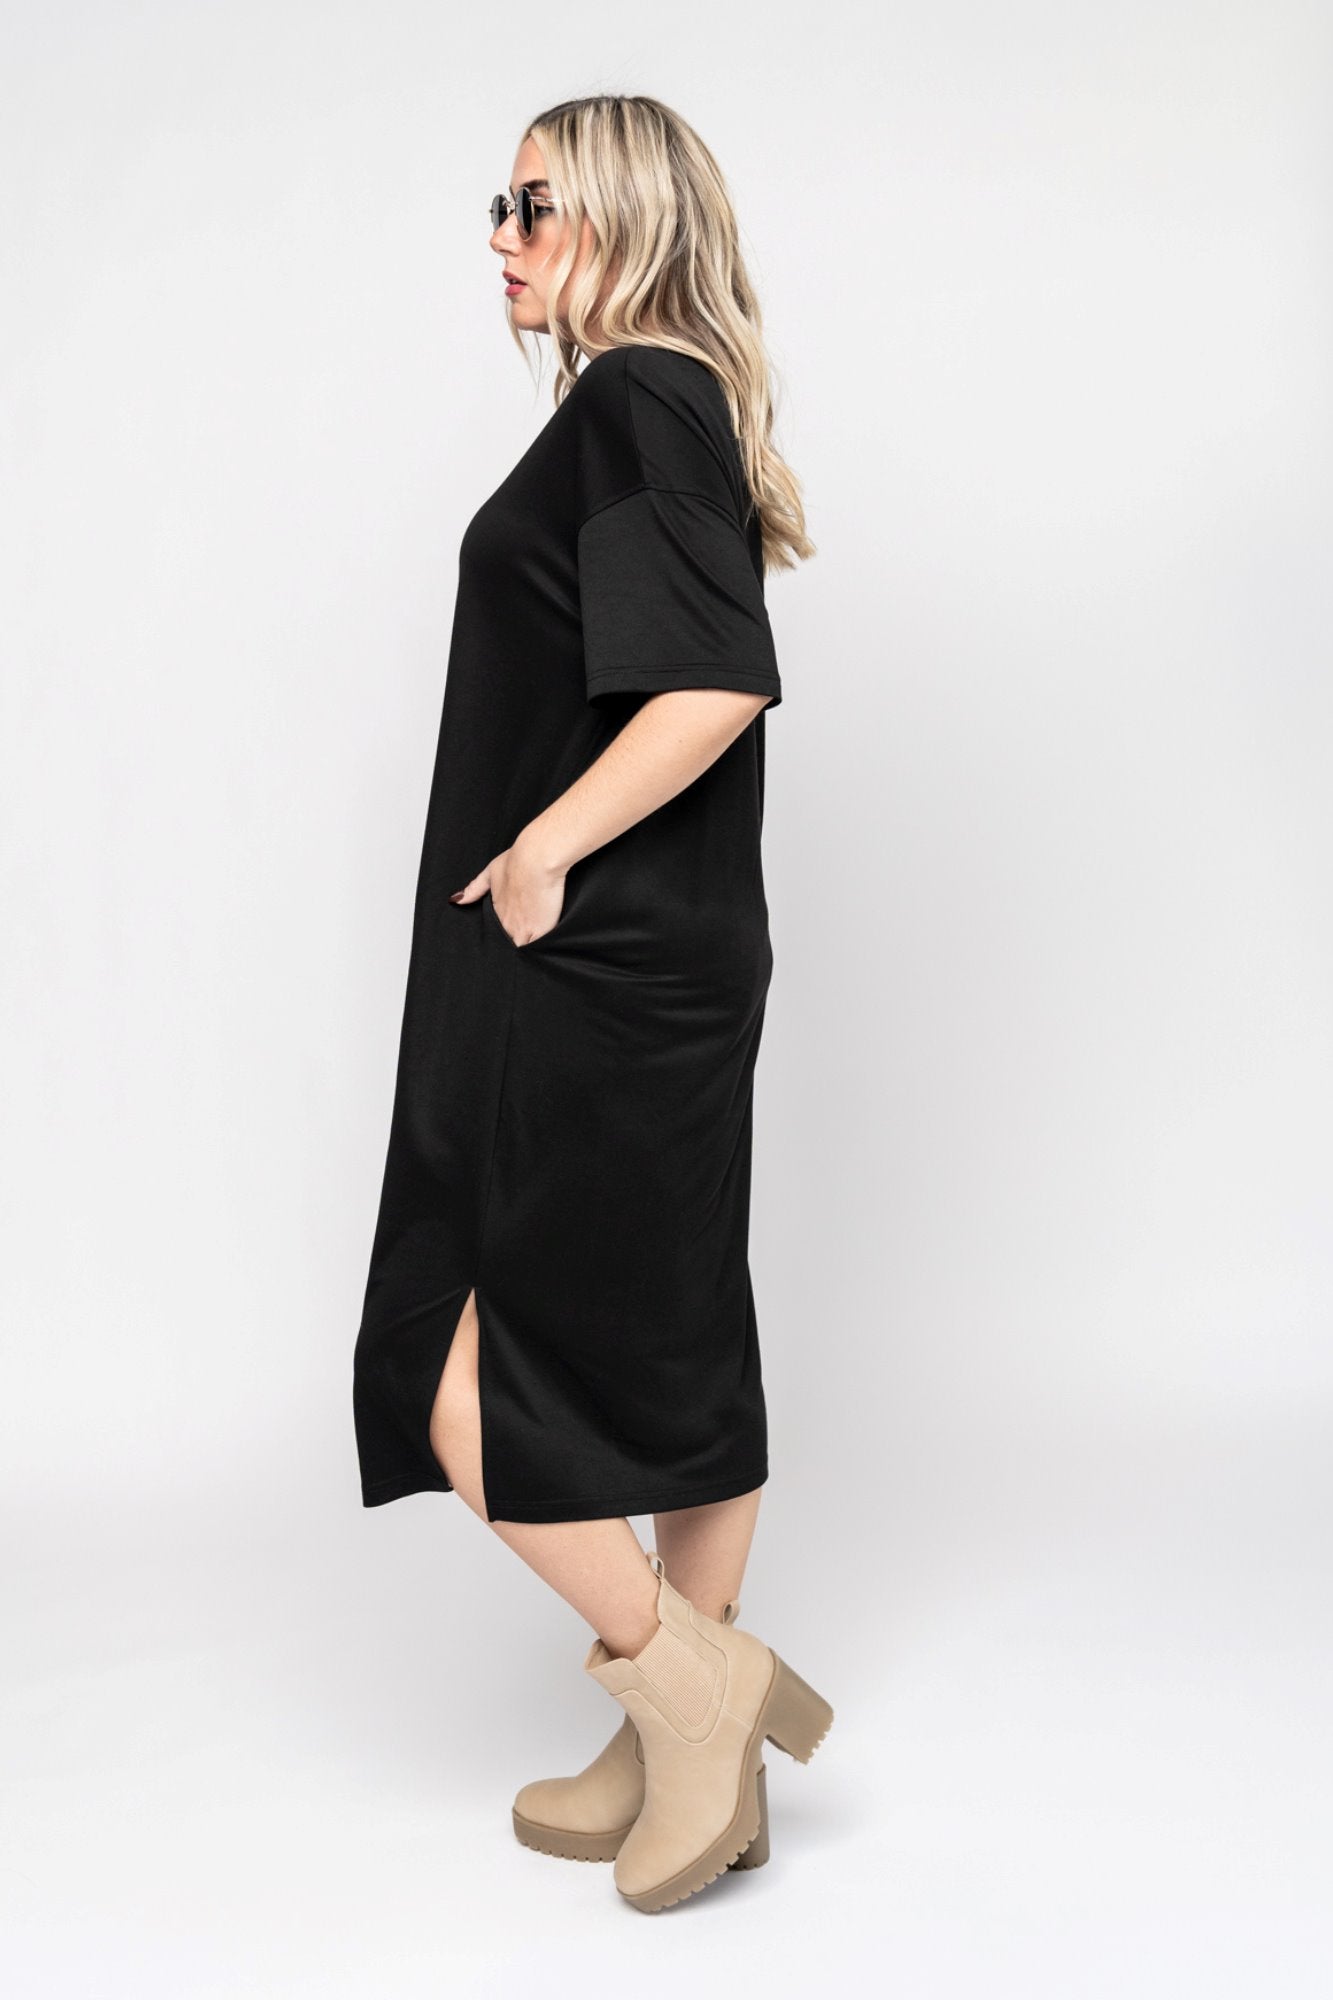 Maeve Dress in Black Holley Girl 